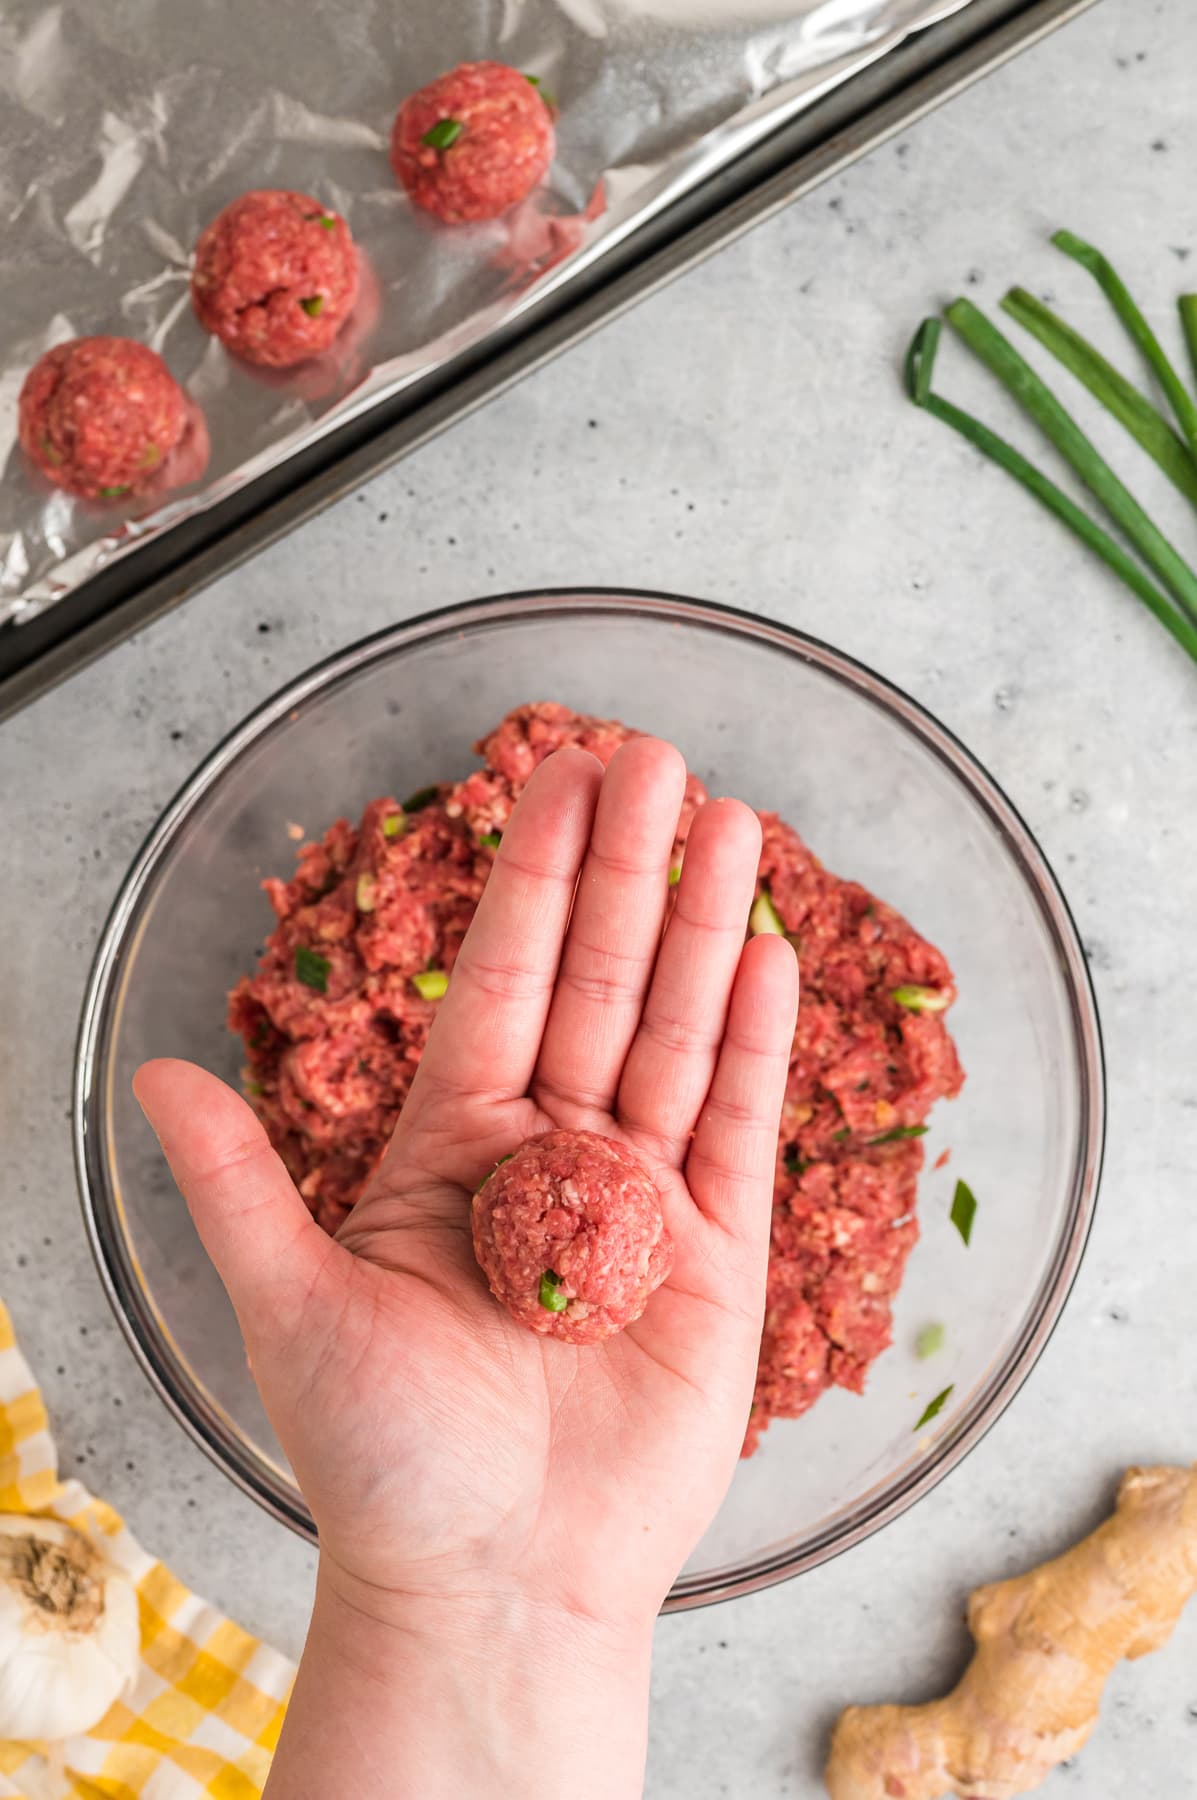 A hand holding a raw beef meatball